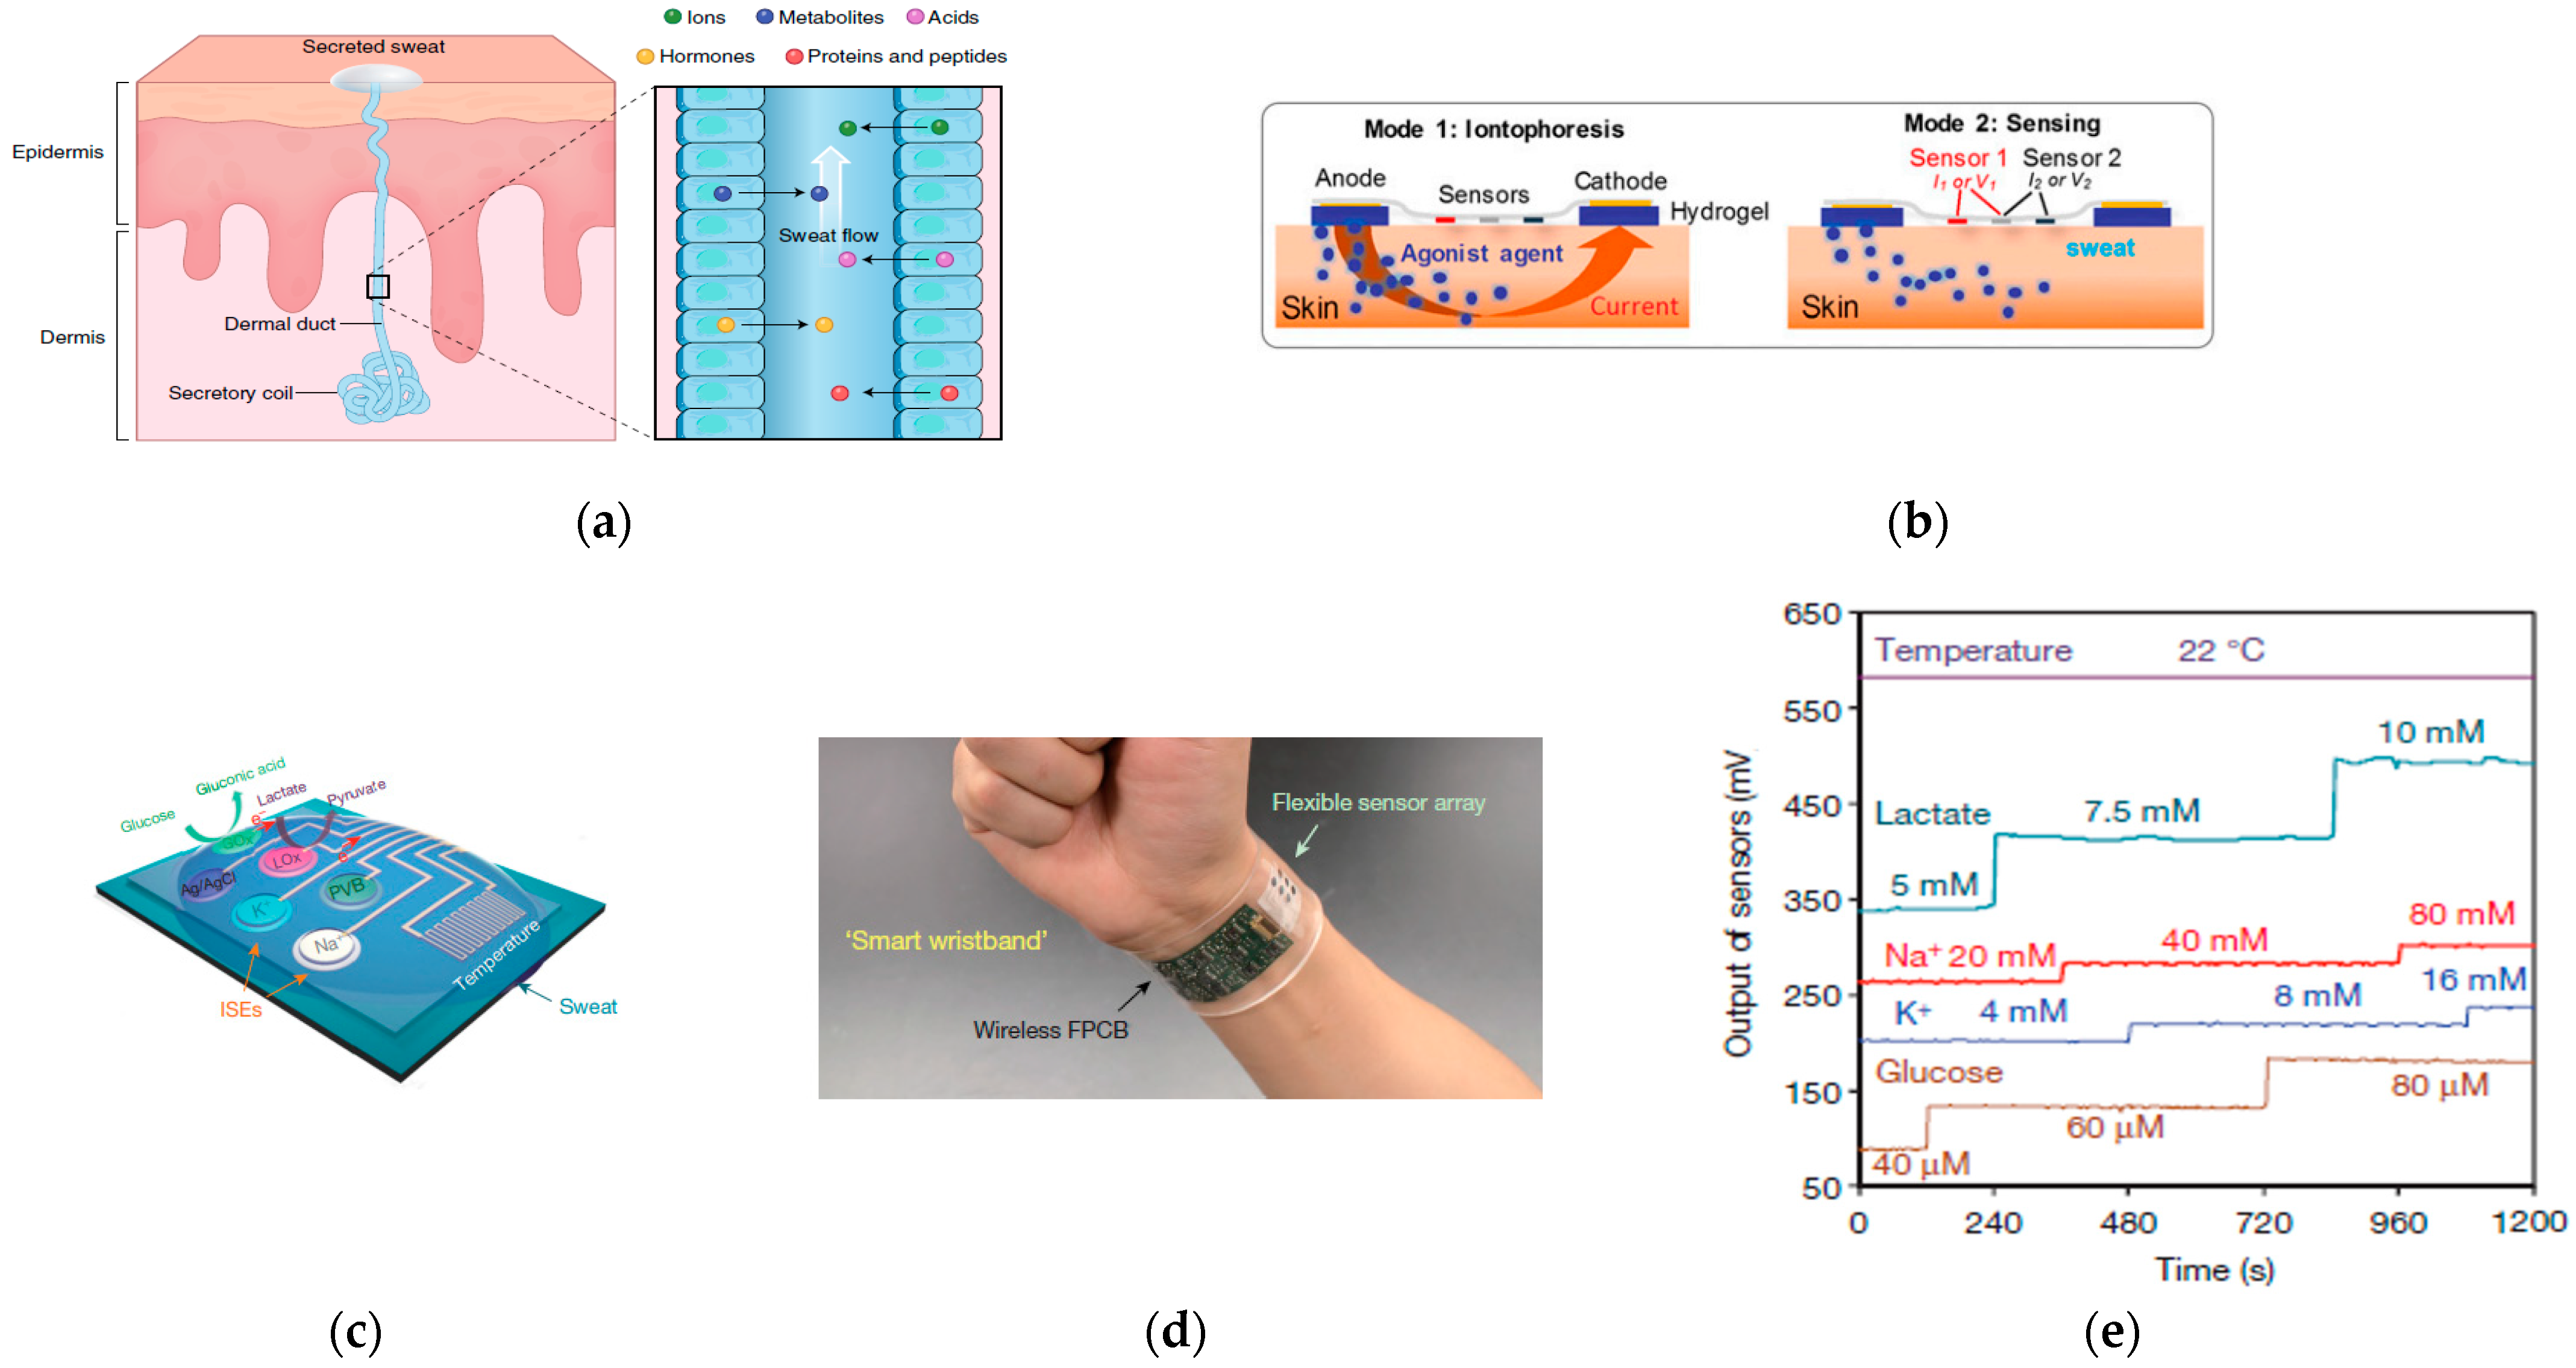 Sensors Free Full Text A Review Of Skin Wearable Sensors For Non Invasive Health Monitoring